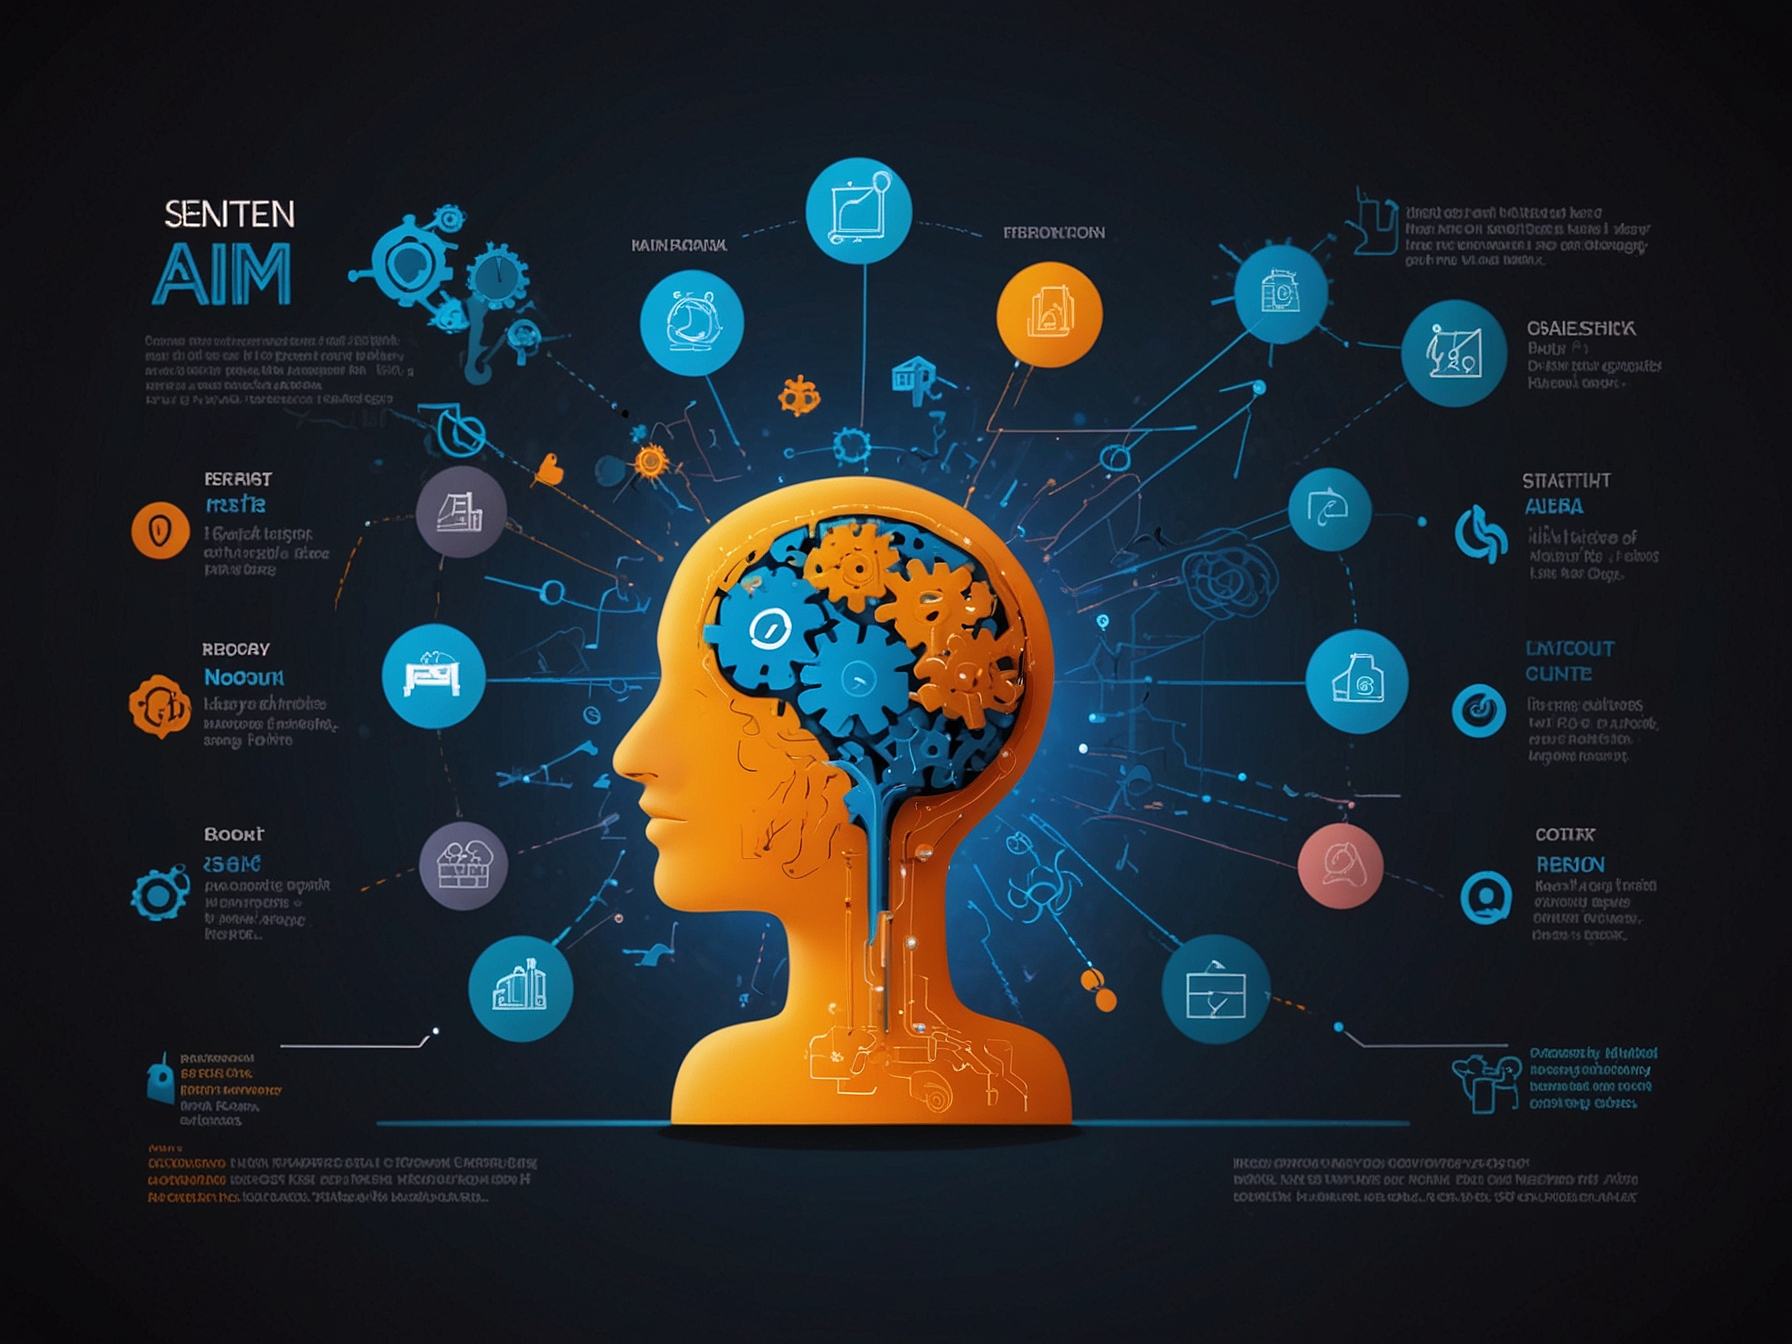 An infographic showing the integration of AI, data, and content in personalization strategies, highlighting how machine learning algorithms improve user experiences.